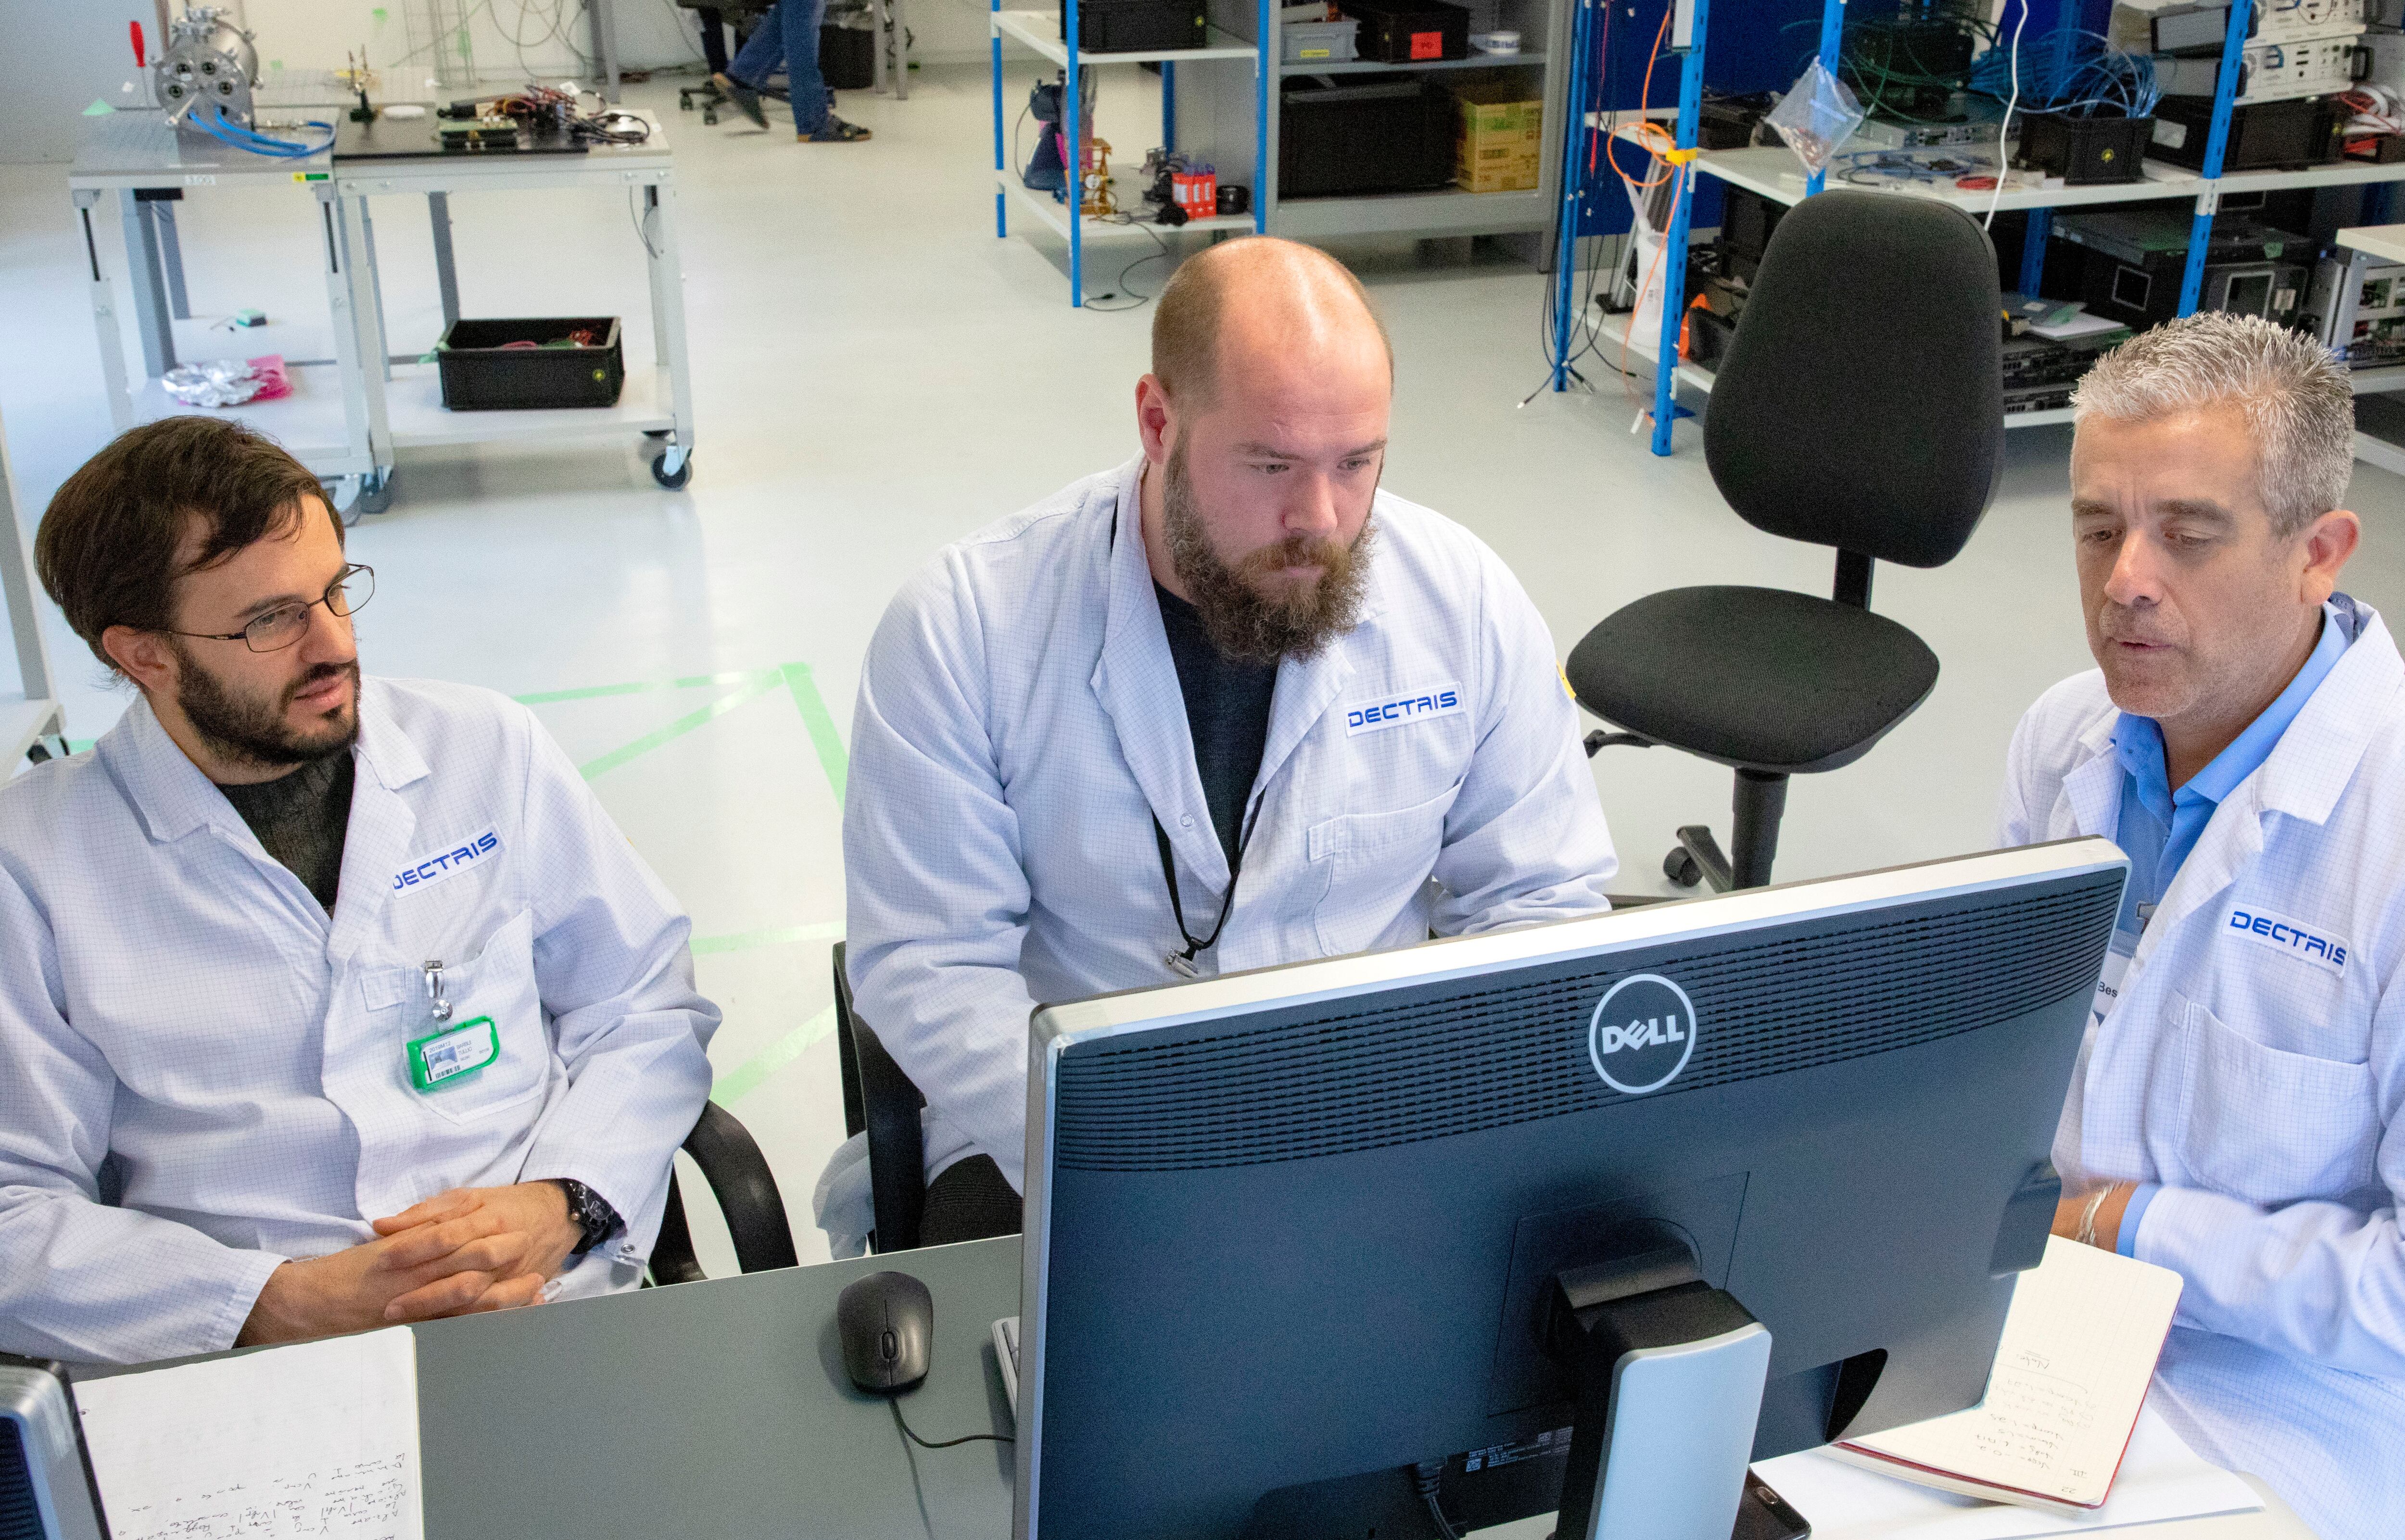 Tullio Barbui, Novimir Pablant and Luis Delgado-Aparicio of PPPL work on their multi-energy soft X-ray detector (ME-SXR) at DECTRIS, the company that manufactured the device on which their detection system was based.  (Photo: PPPL)